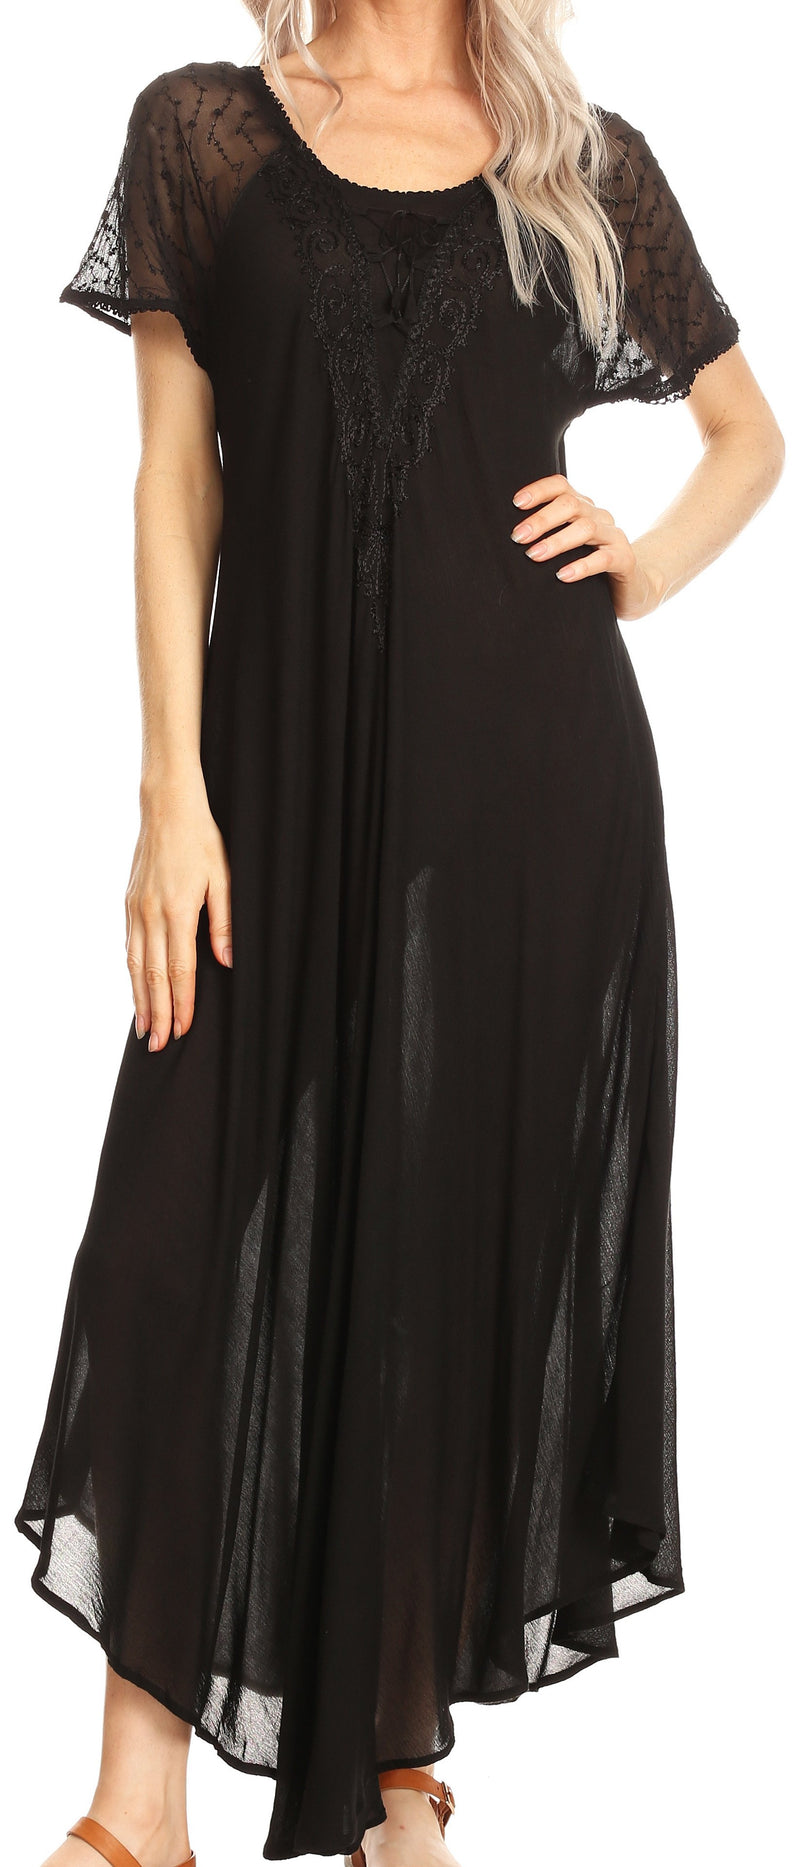 Sakkas Hayden Embroidered Lace-Up Caftan Dress / Cover Up with Eyelet Sleeves